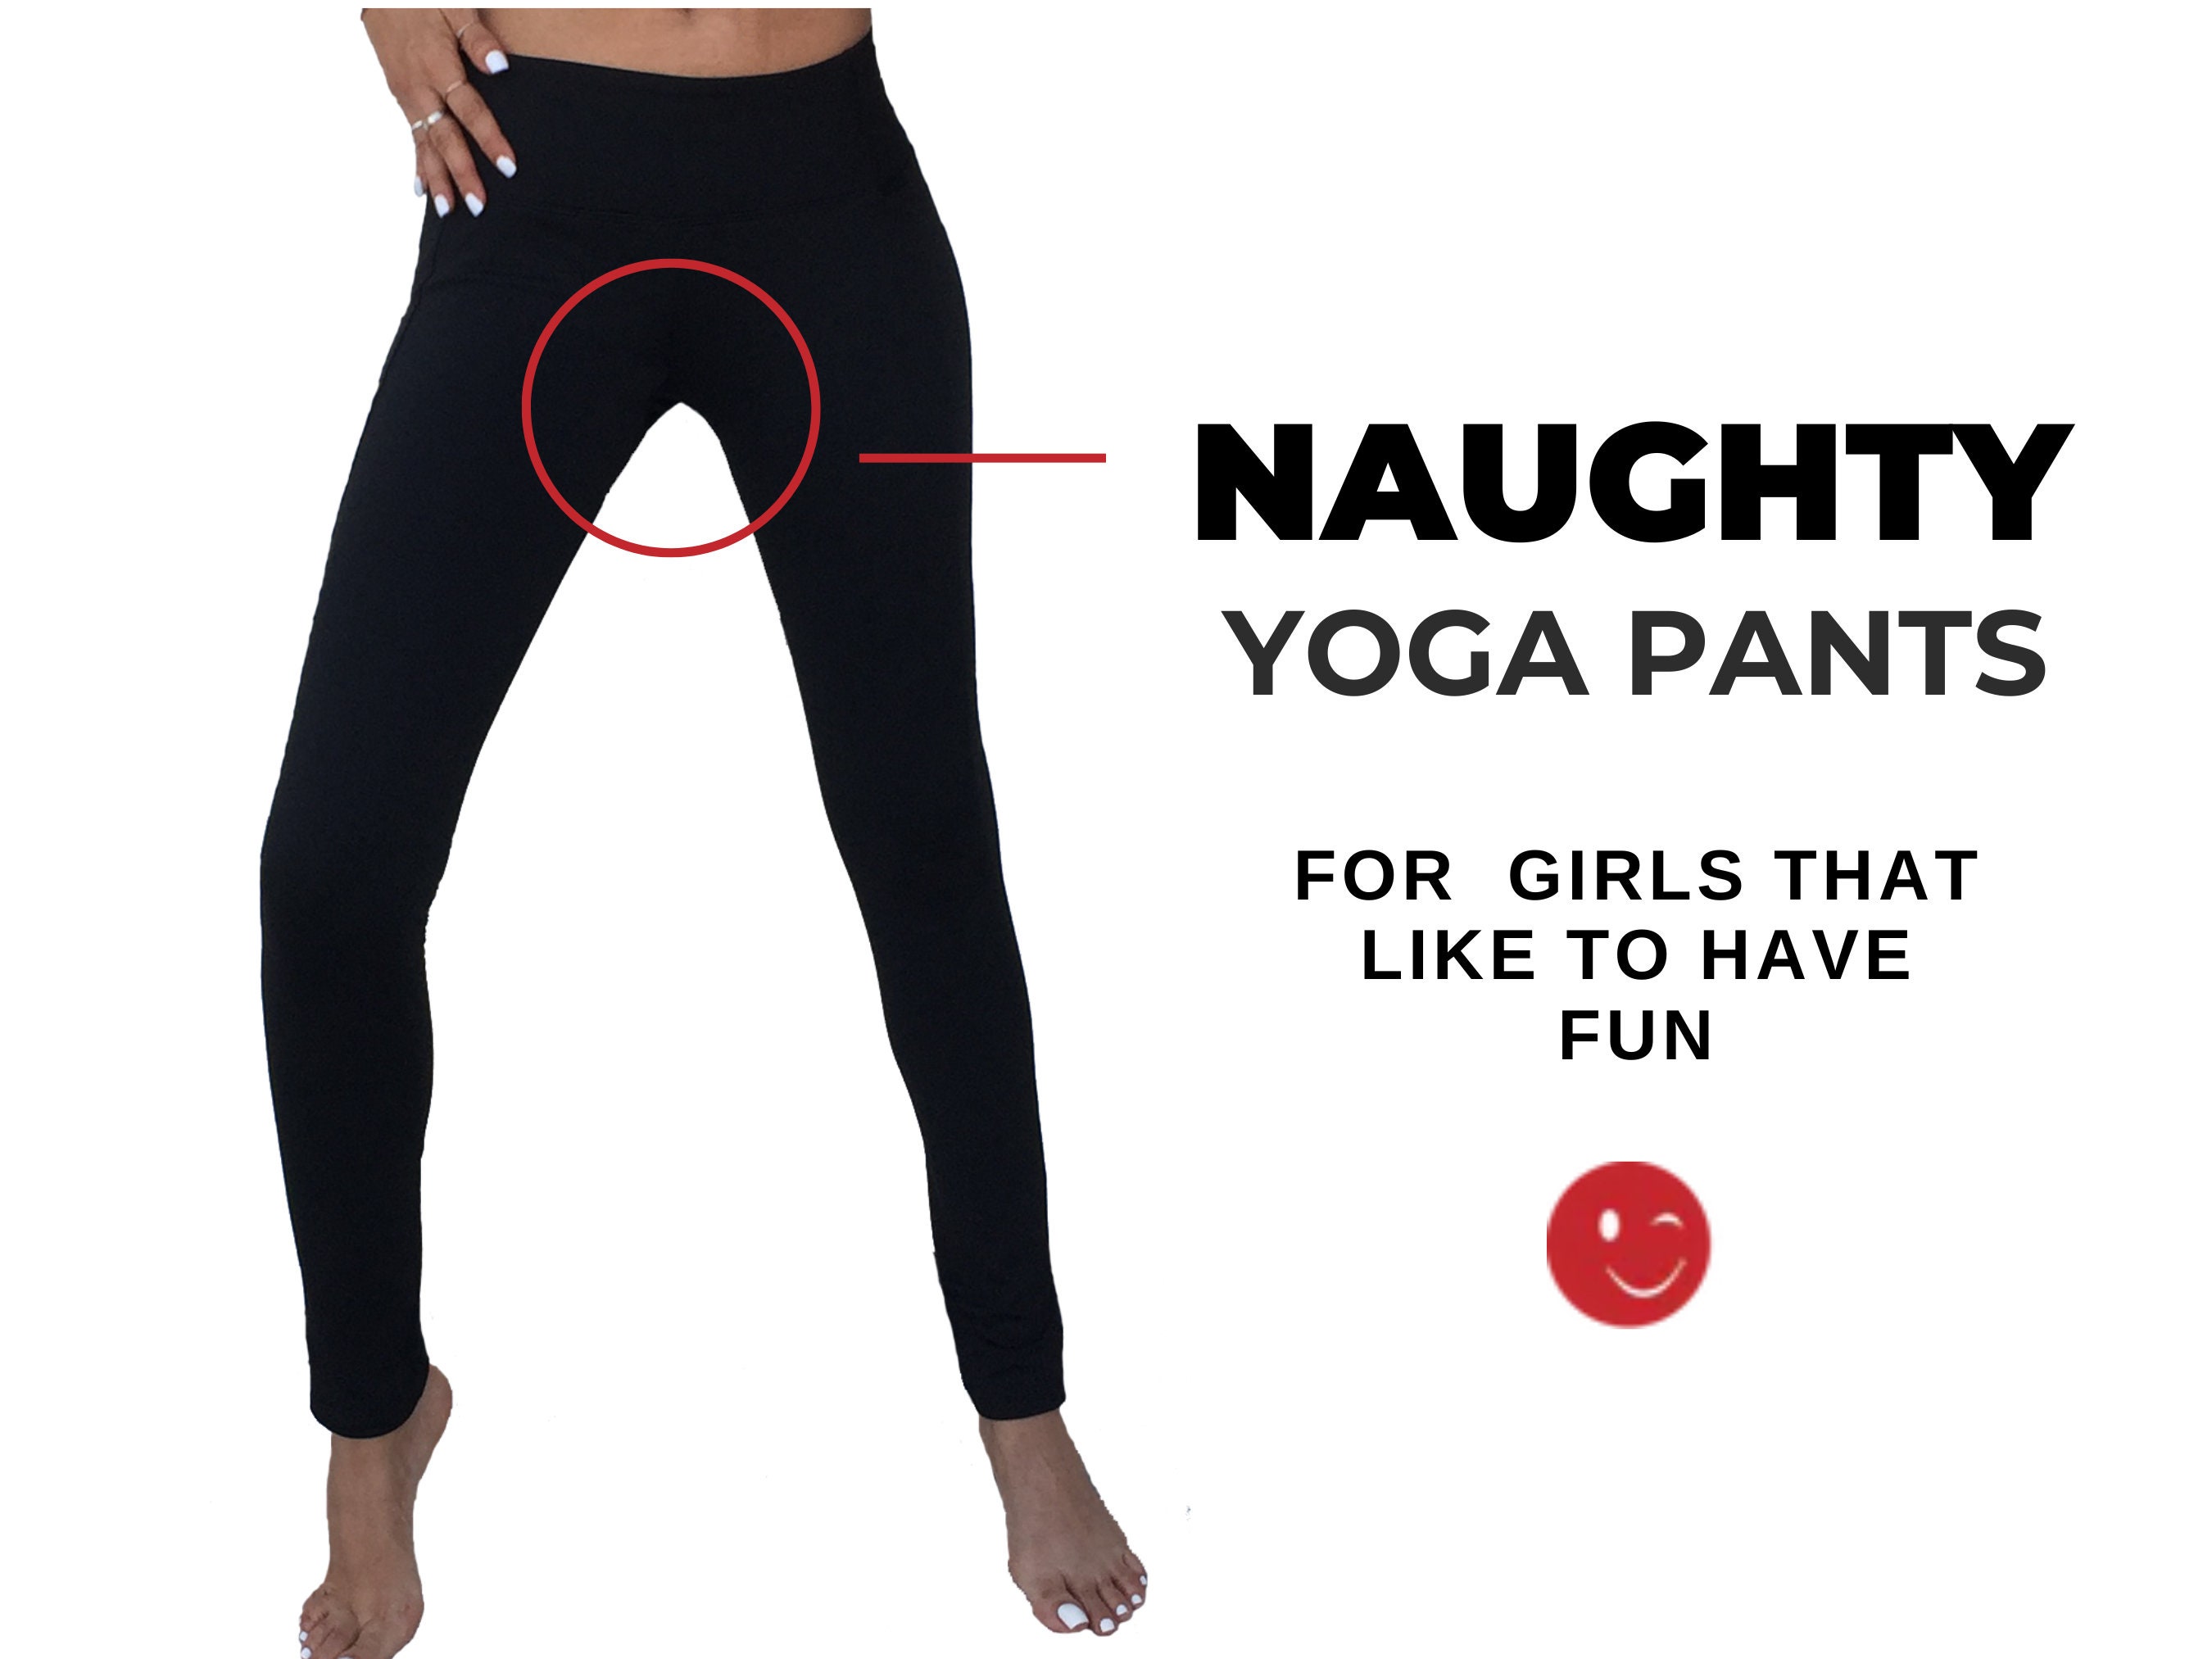 Srirachas Yoga Pant, Flattering and Crotchless, Fun and Sexy Leggings,  Naughty Gift, Hot Adult Date Clothing, Better Than Lingerie, Romantic -   Israel